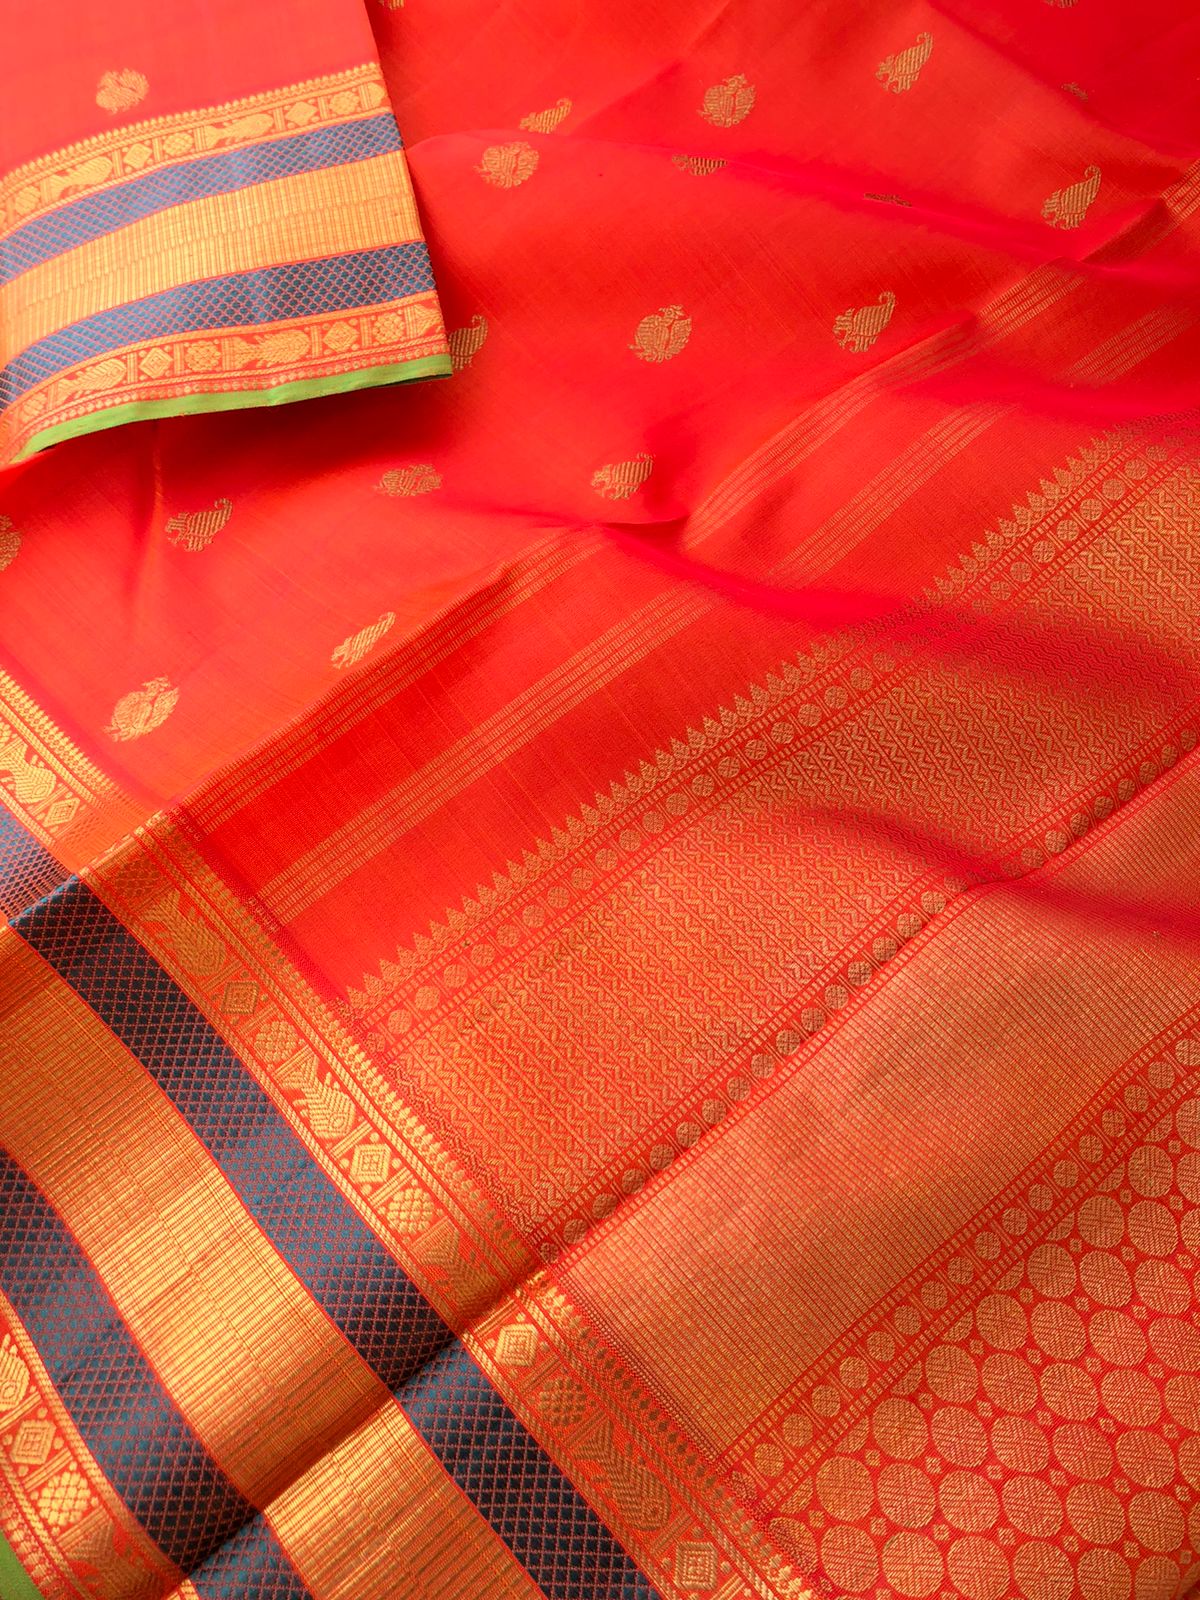 The Golden Treasures Of Kanchivaram - the best red short orange with paisley and pakshi golden buttas over the body with fish pett woven beautiful borders